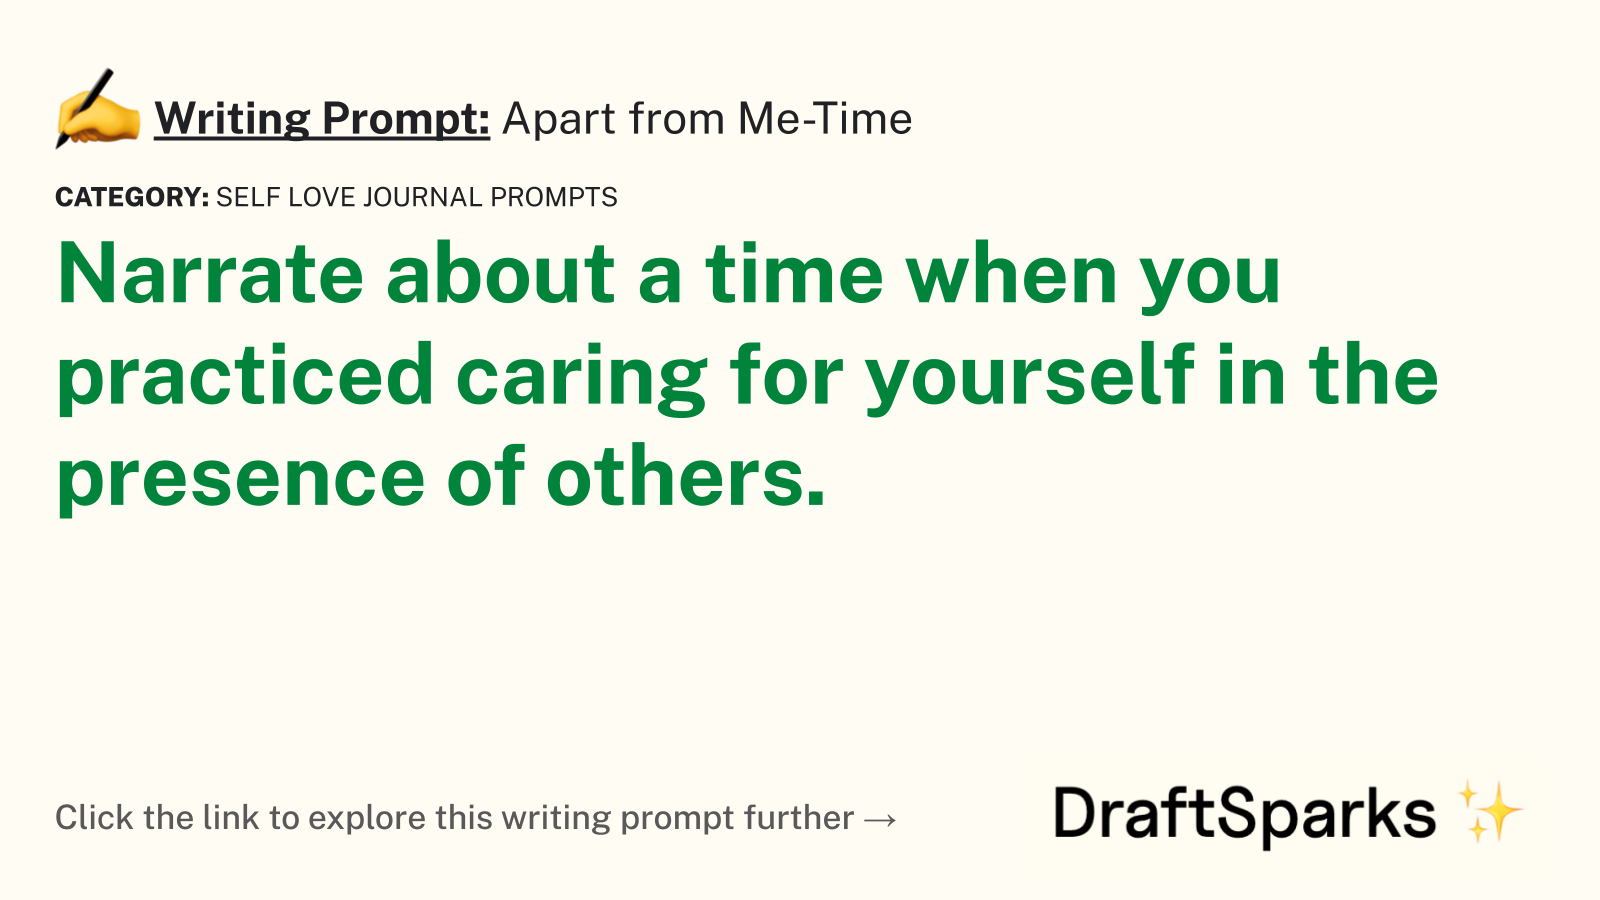 Apart from Me-Time